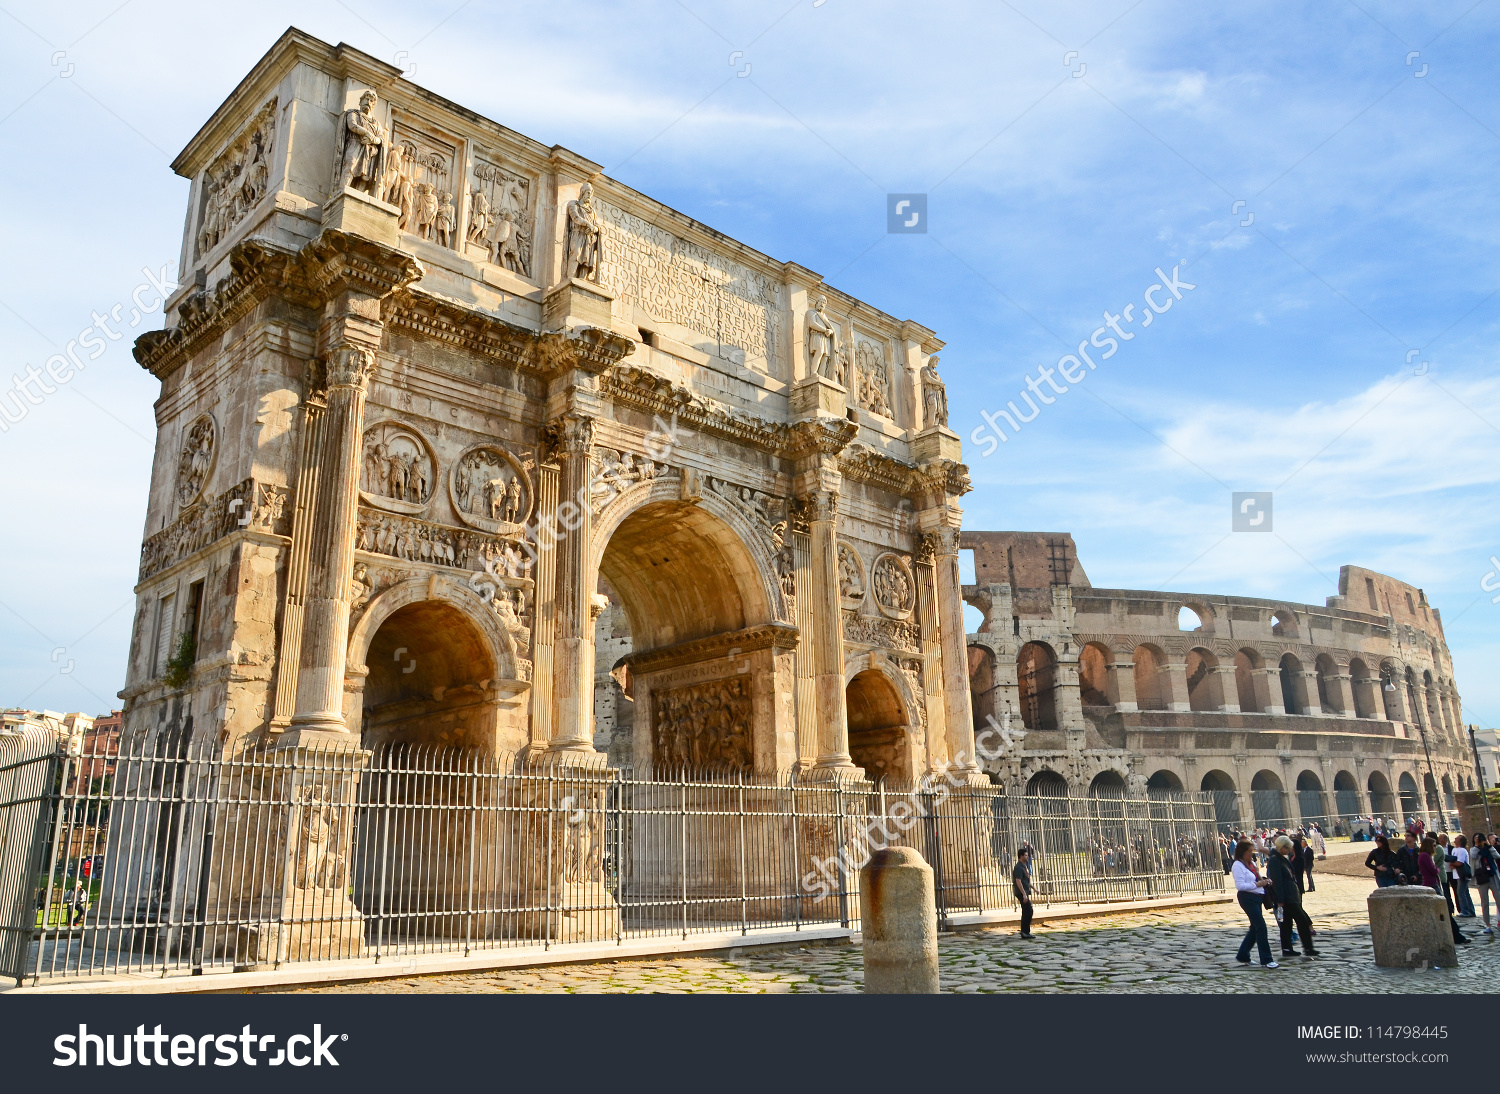 Arch Constantine Coliseum Background Rome Italy Stock Photo.